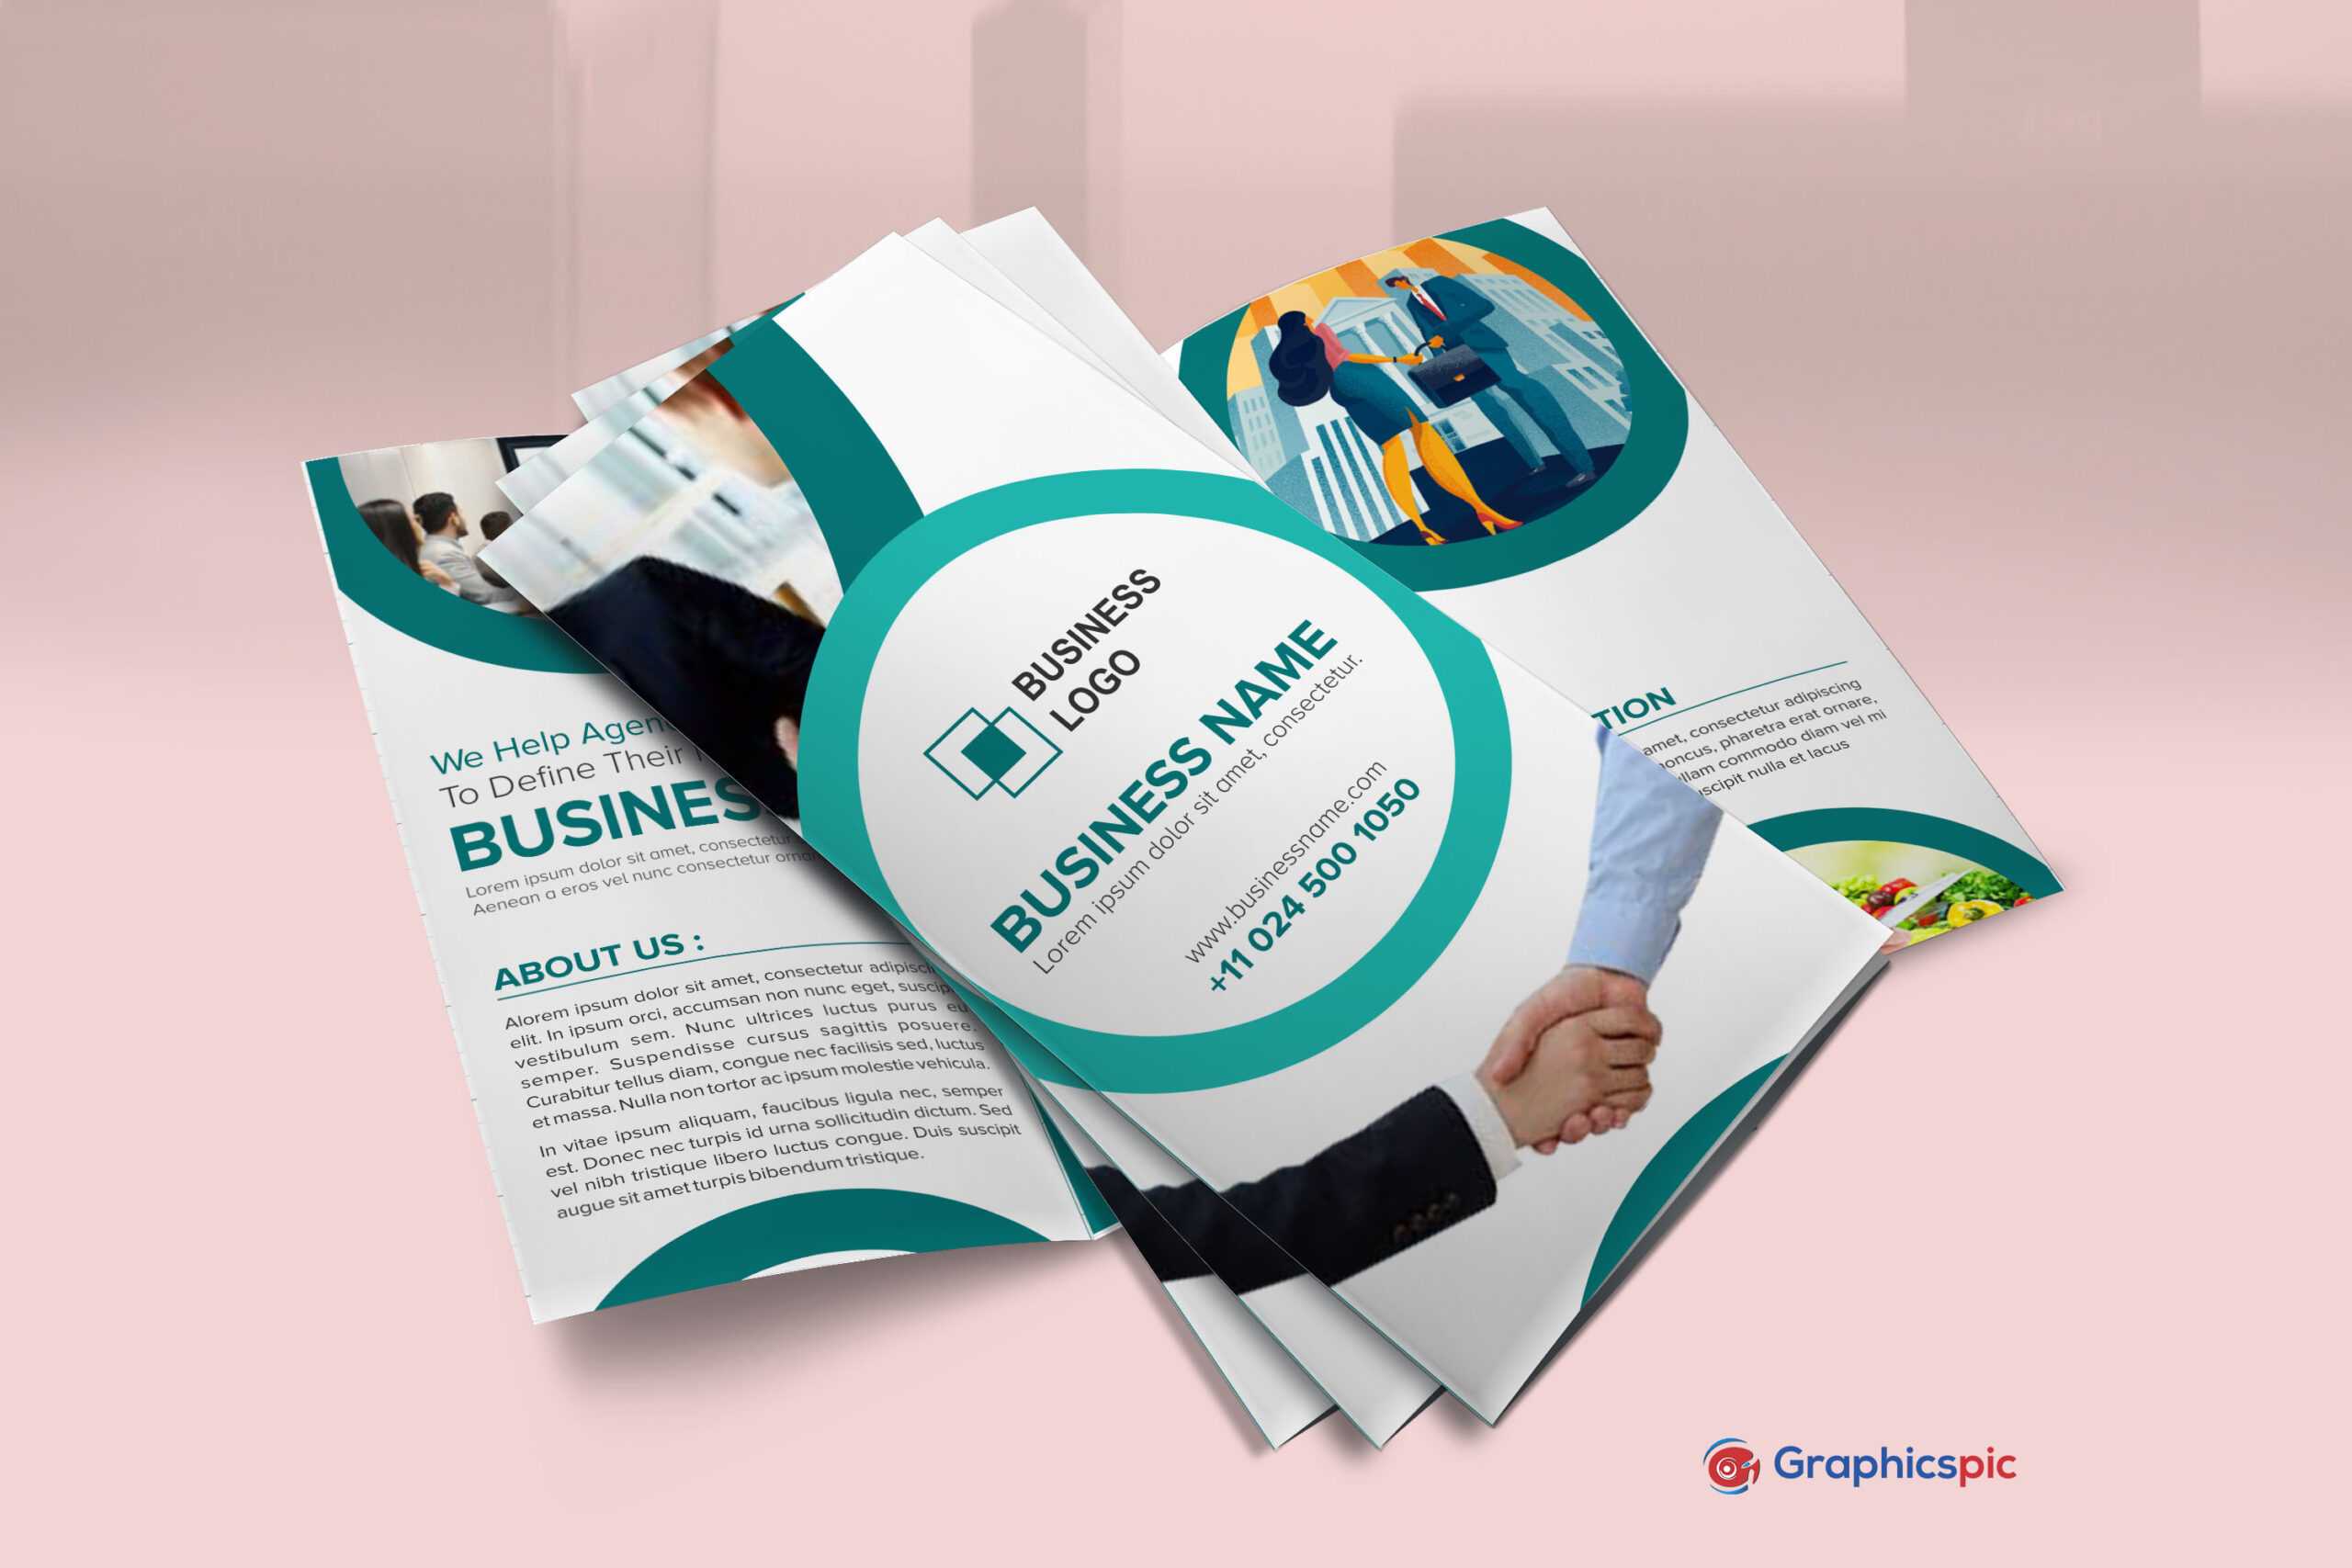 Free Download Brochure Templates Design For Events, Products Pertaining To Creative Brochure Templates Free Download